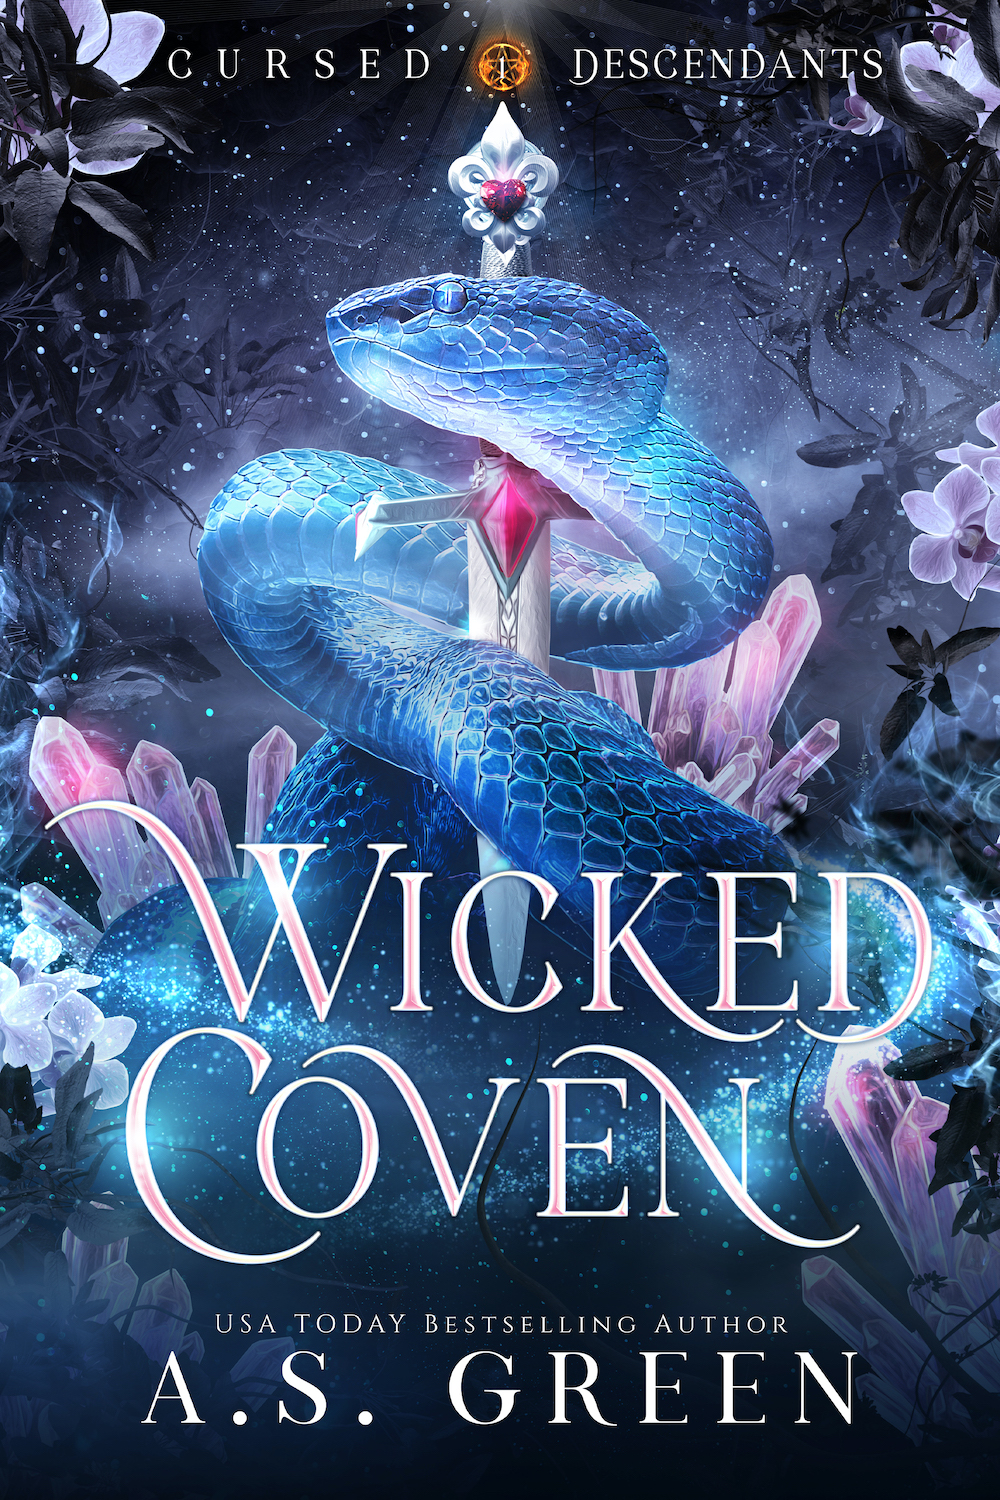 BOOK BLITZ: WICKED COVEN (CURSED DESCENDANTS #1) BY A.S. GREEN + GIVEAWAY